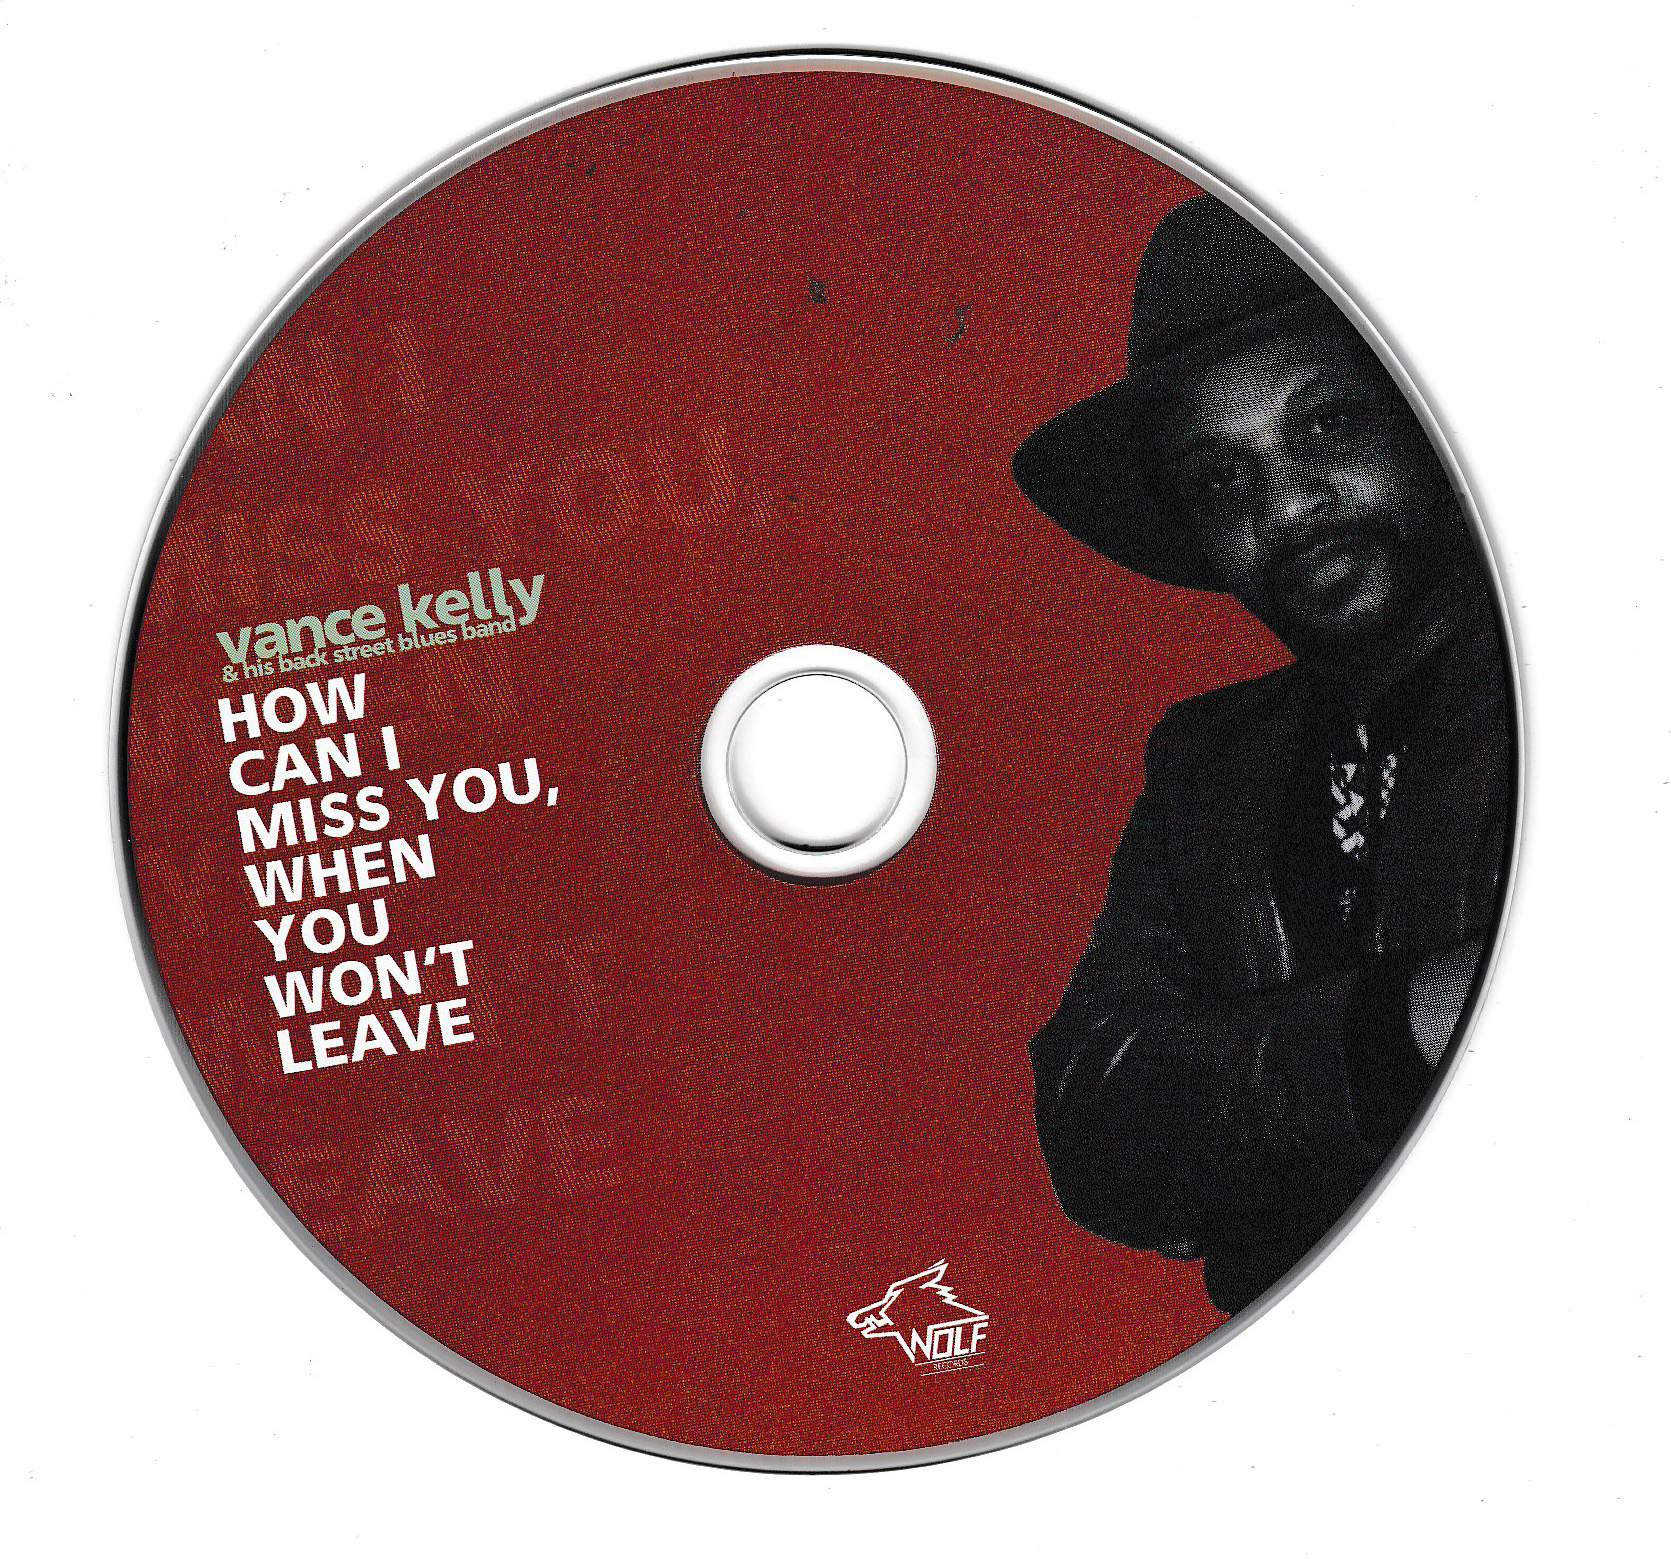 Vance Kelly & The Back Street Blues Band - How Can I Miss You, When You Won't Leave - CD